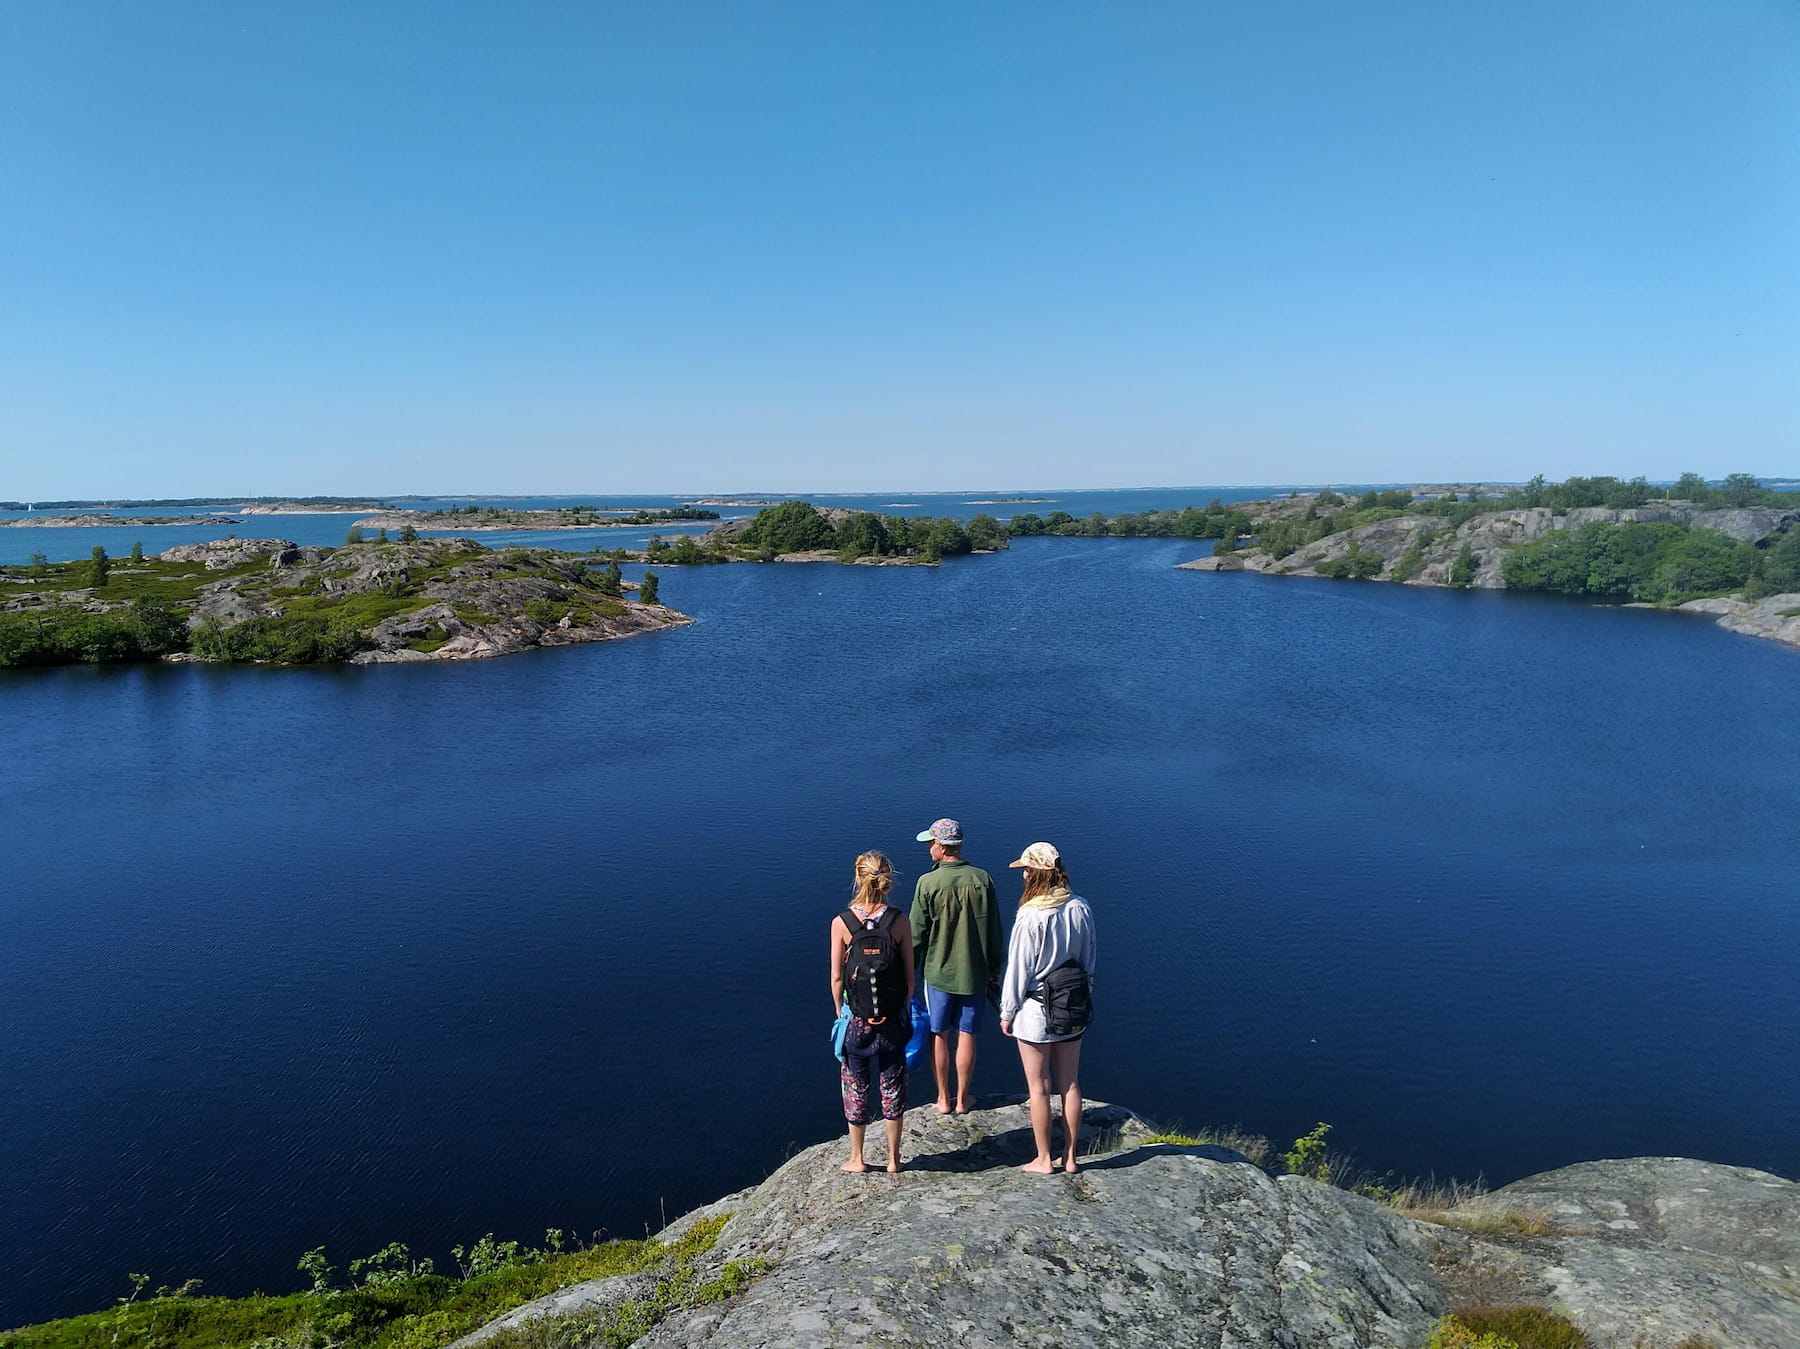 Three people admiring the archipelago sea from a cliff